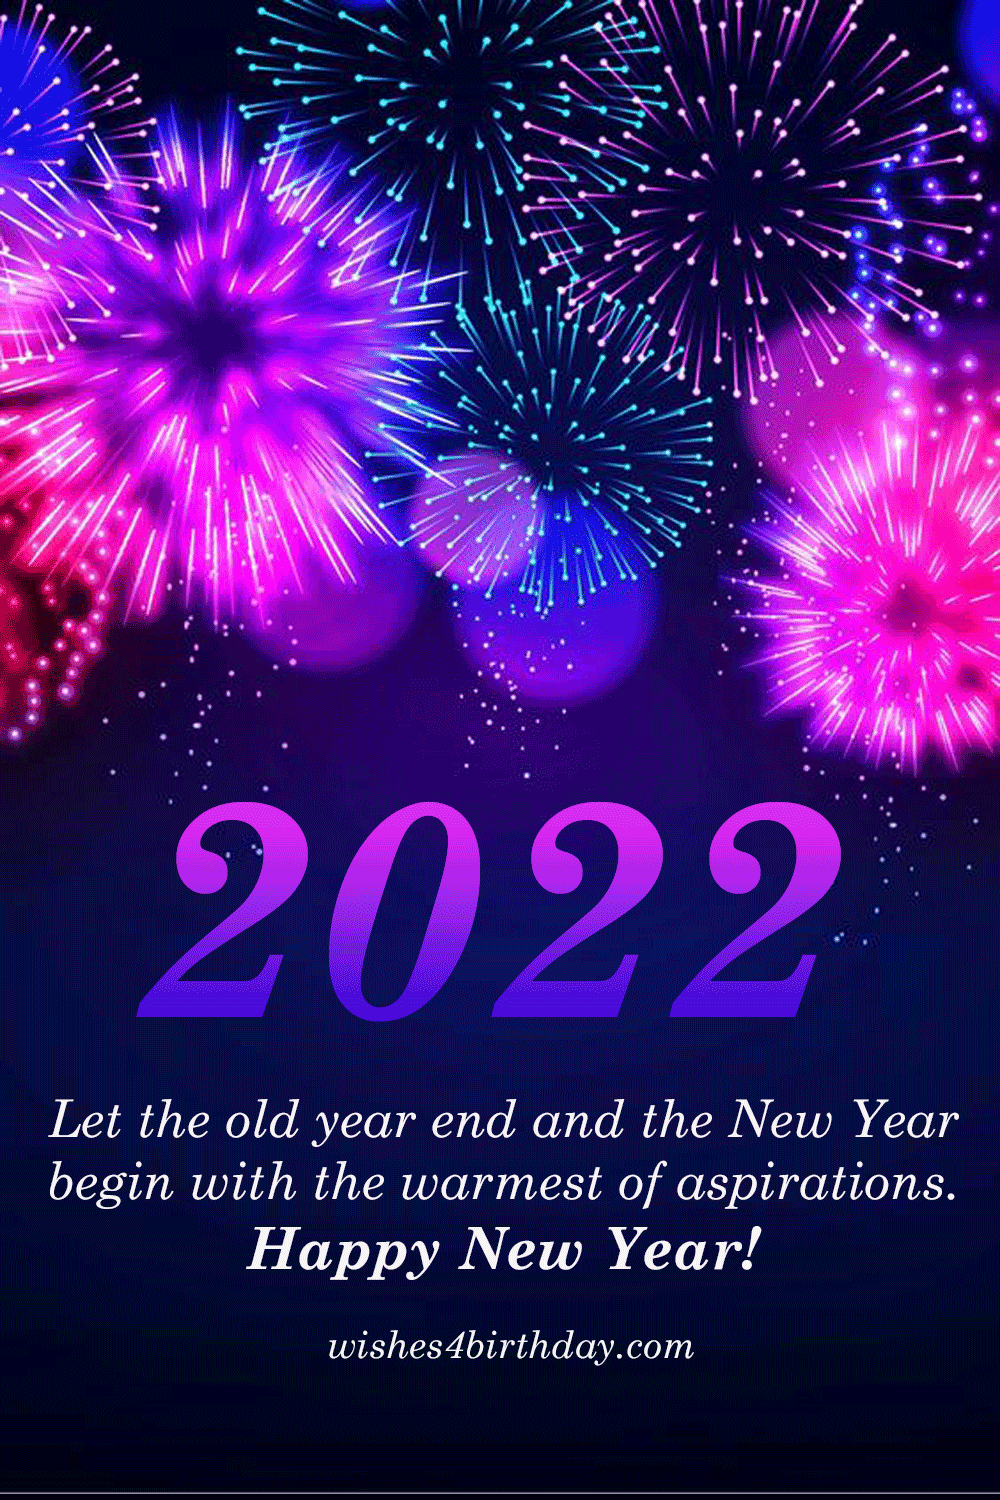 2022 Happy New Year Wallpapers